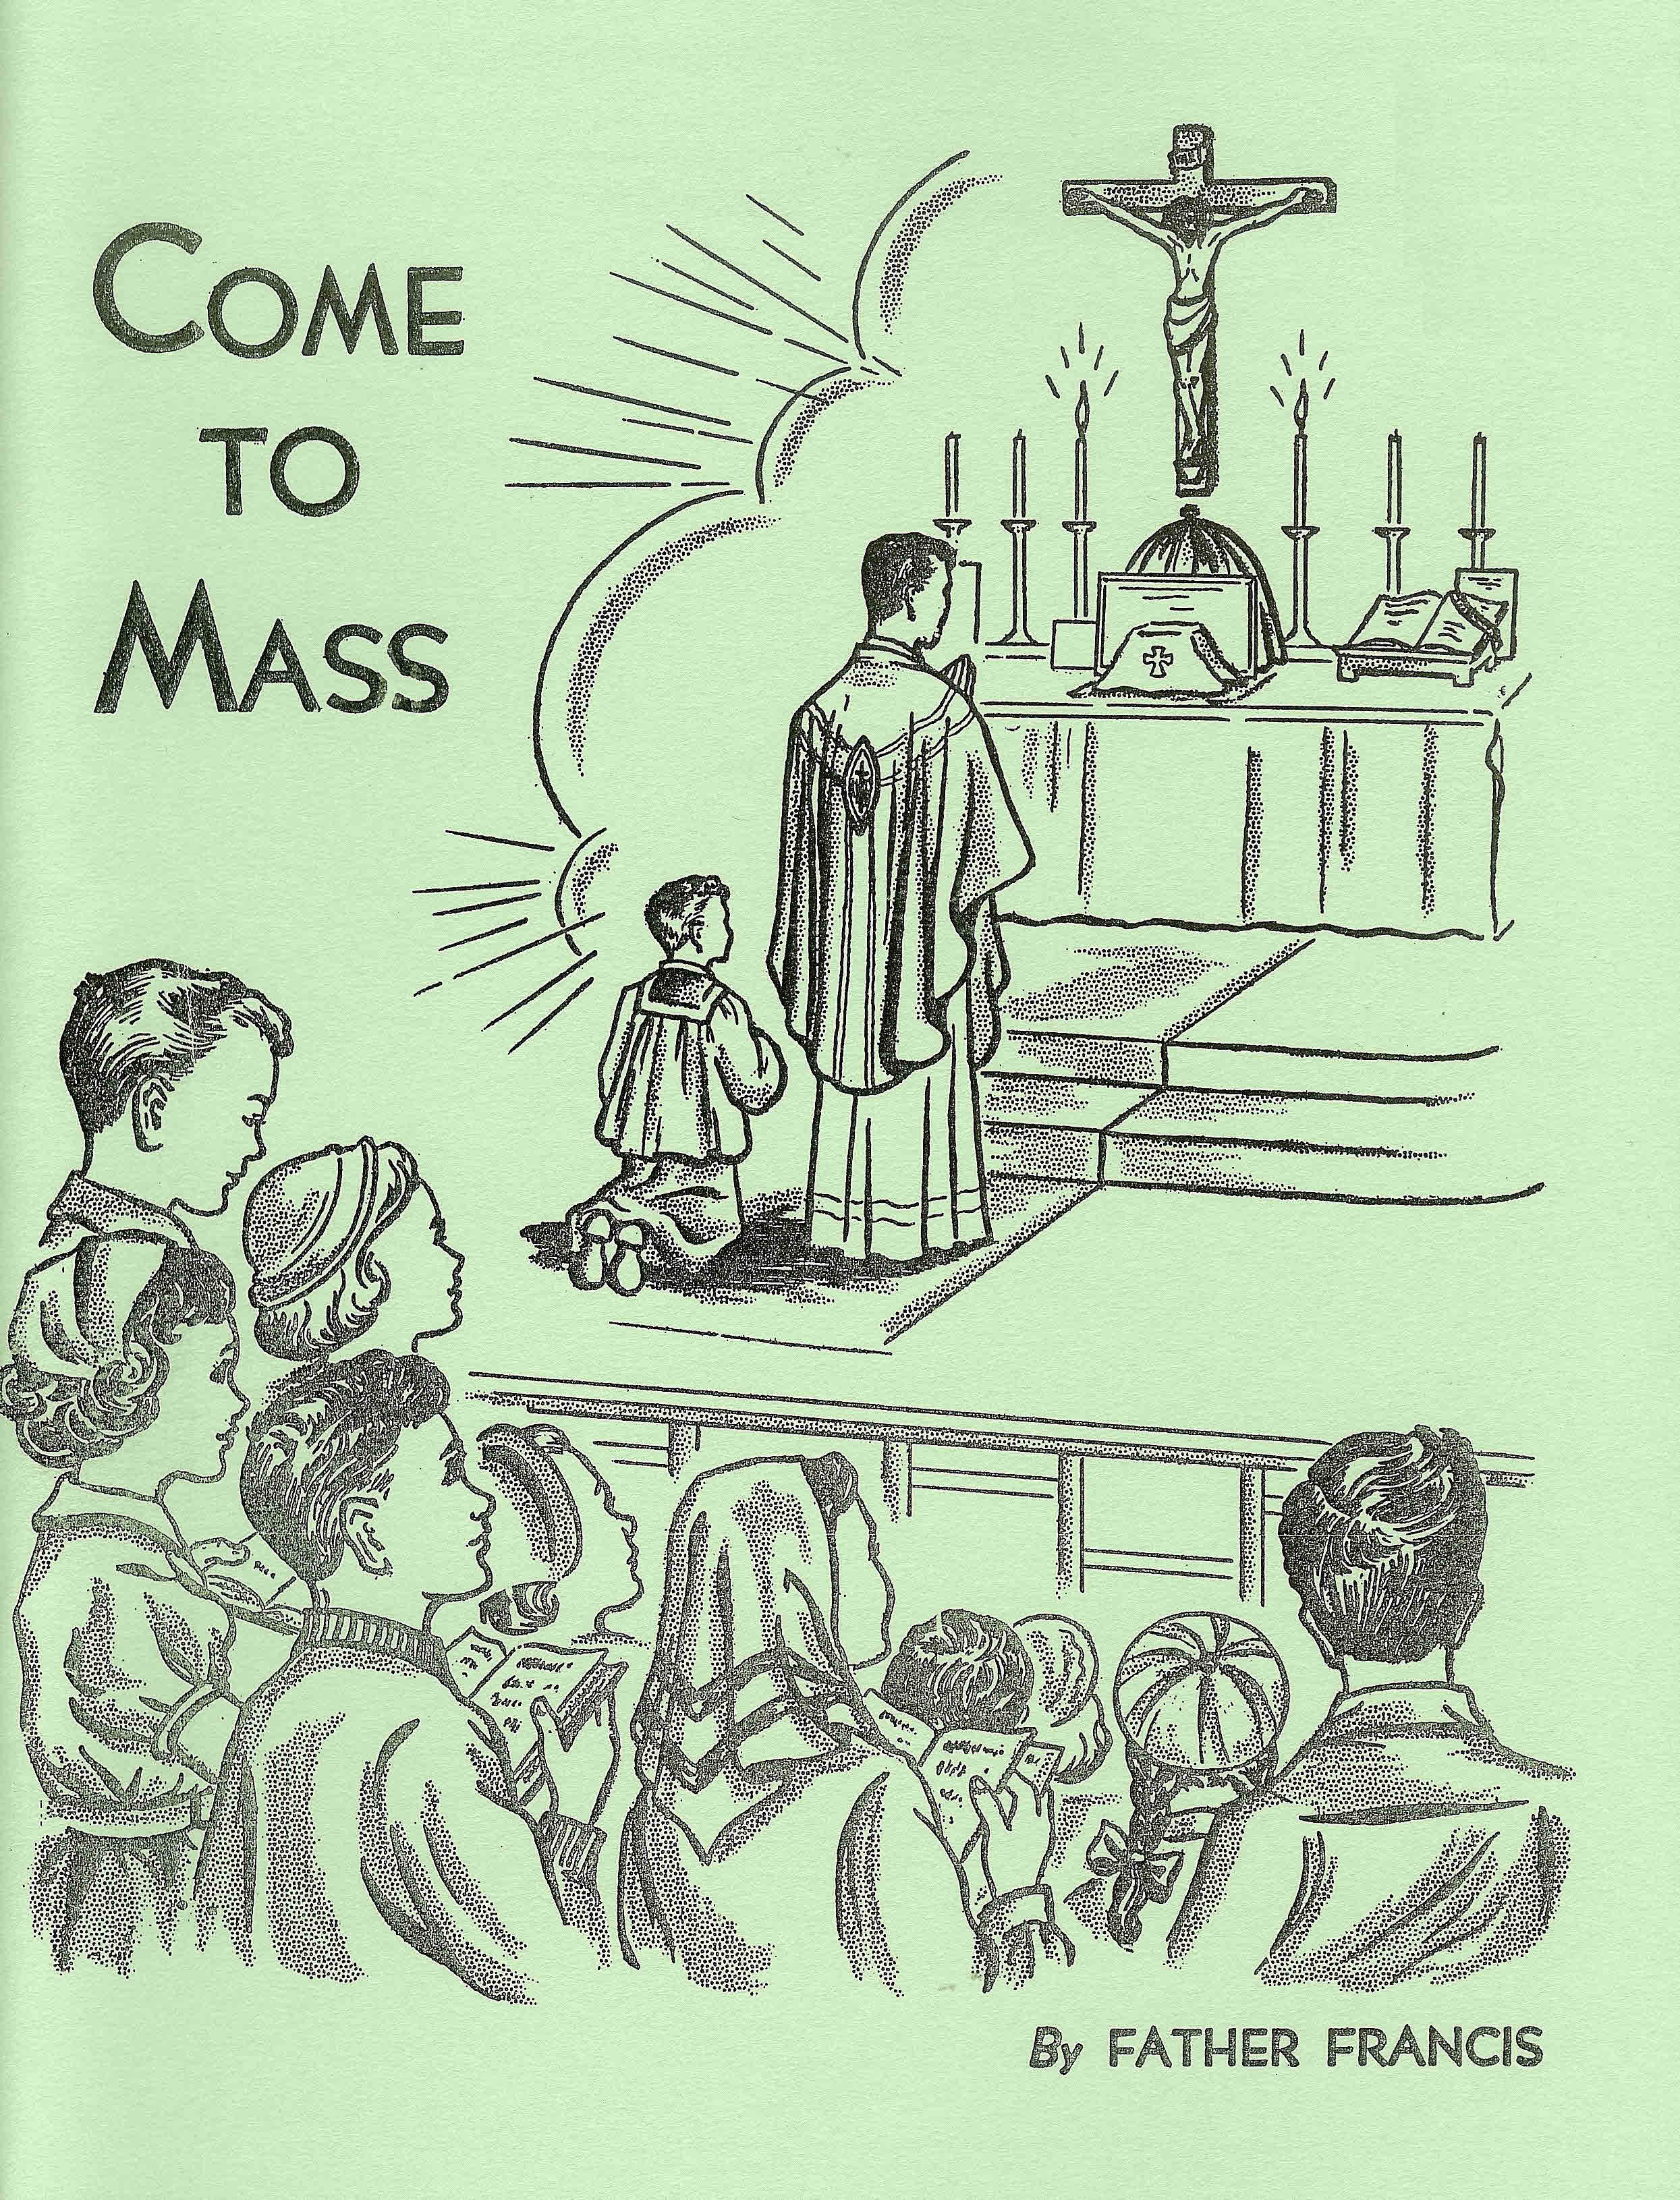 Father Francis: Come to Mass by Father Francis